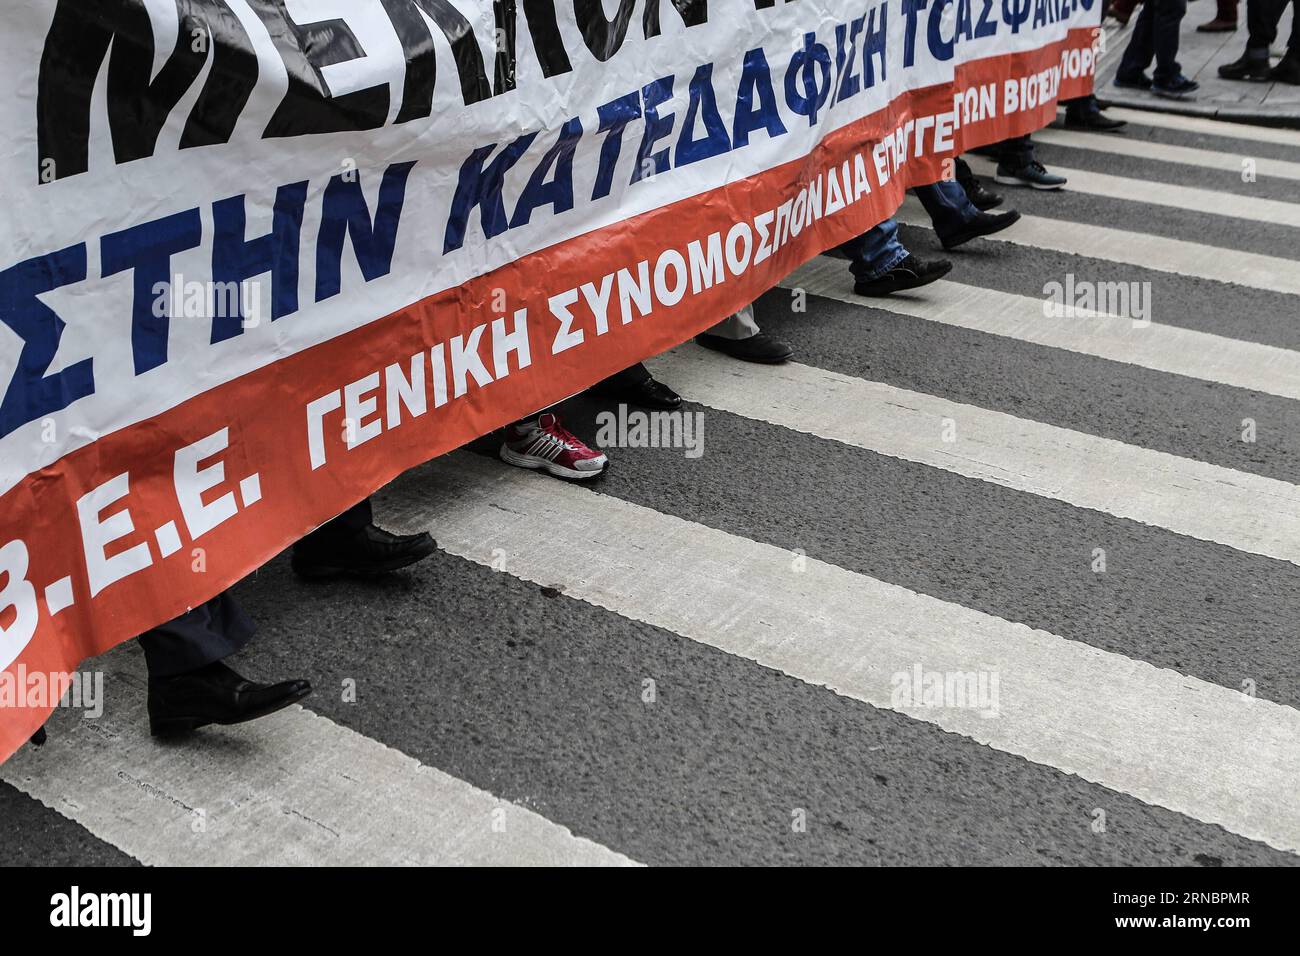 ATHENS, March 9, 2016 -- Greek protesters march to the parliament carrying a banner reading Our future is not for sale. No to the destruction of the pension system in Athens, capital of Greece, on March 9, 2016. A new round of Greece s bailout program review resumed Wednesday with hope the two sides bridge the gap on the next set of fiscal adjustment and reform measures. ) GREECE-ATHENS-ANTI-AUSTERITY-PROTEST LefterisxPartsalis PUBLICATIONxNOTxINxCHN   Athens March 9 2016 Greek protesters March to The Parliament carrying a Banner Reading Our Future IS Not for Sale No to The Destruction of The Stock Photo